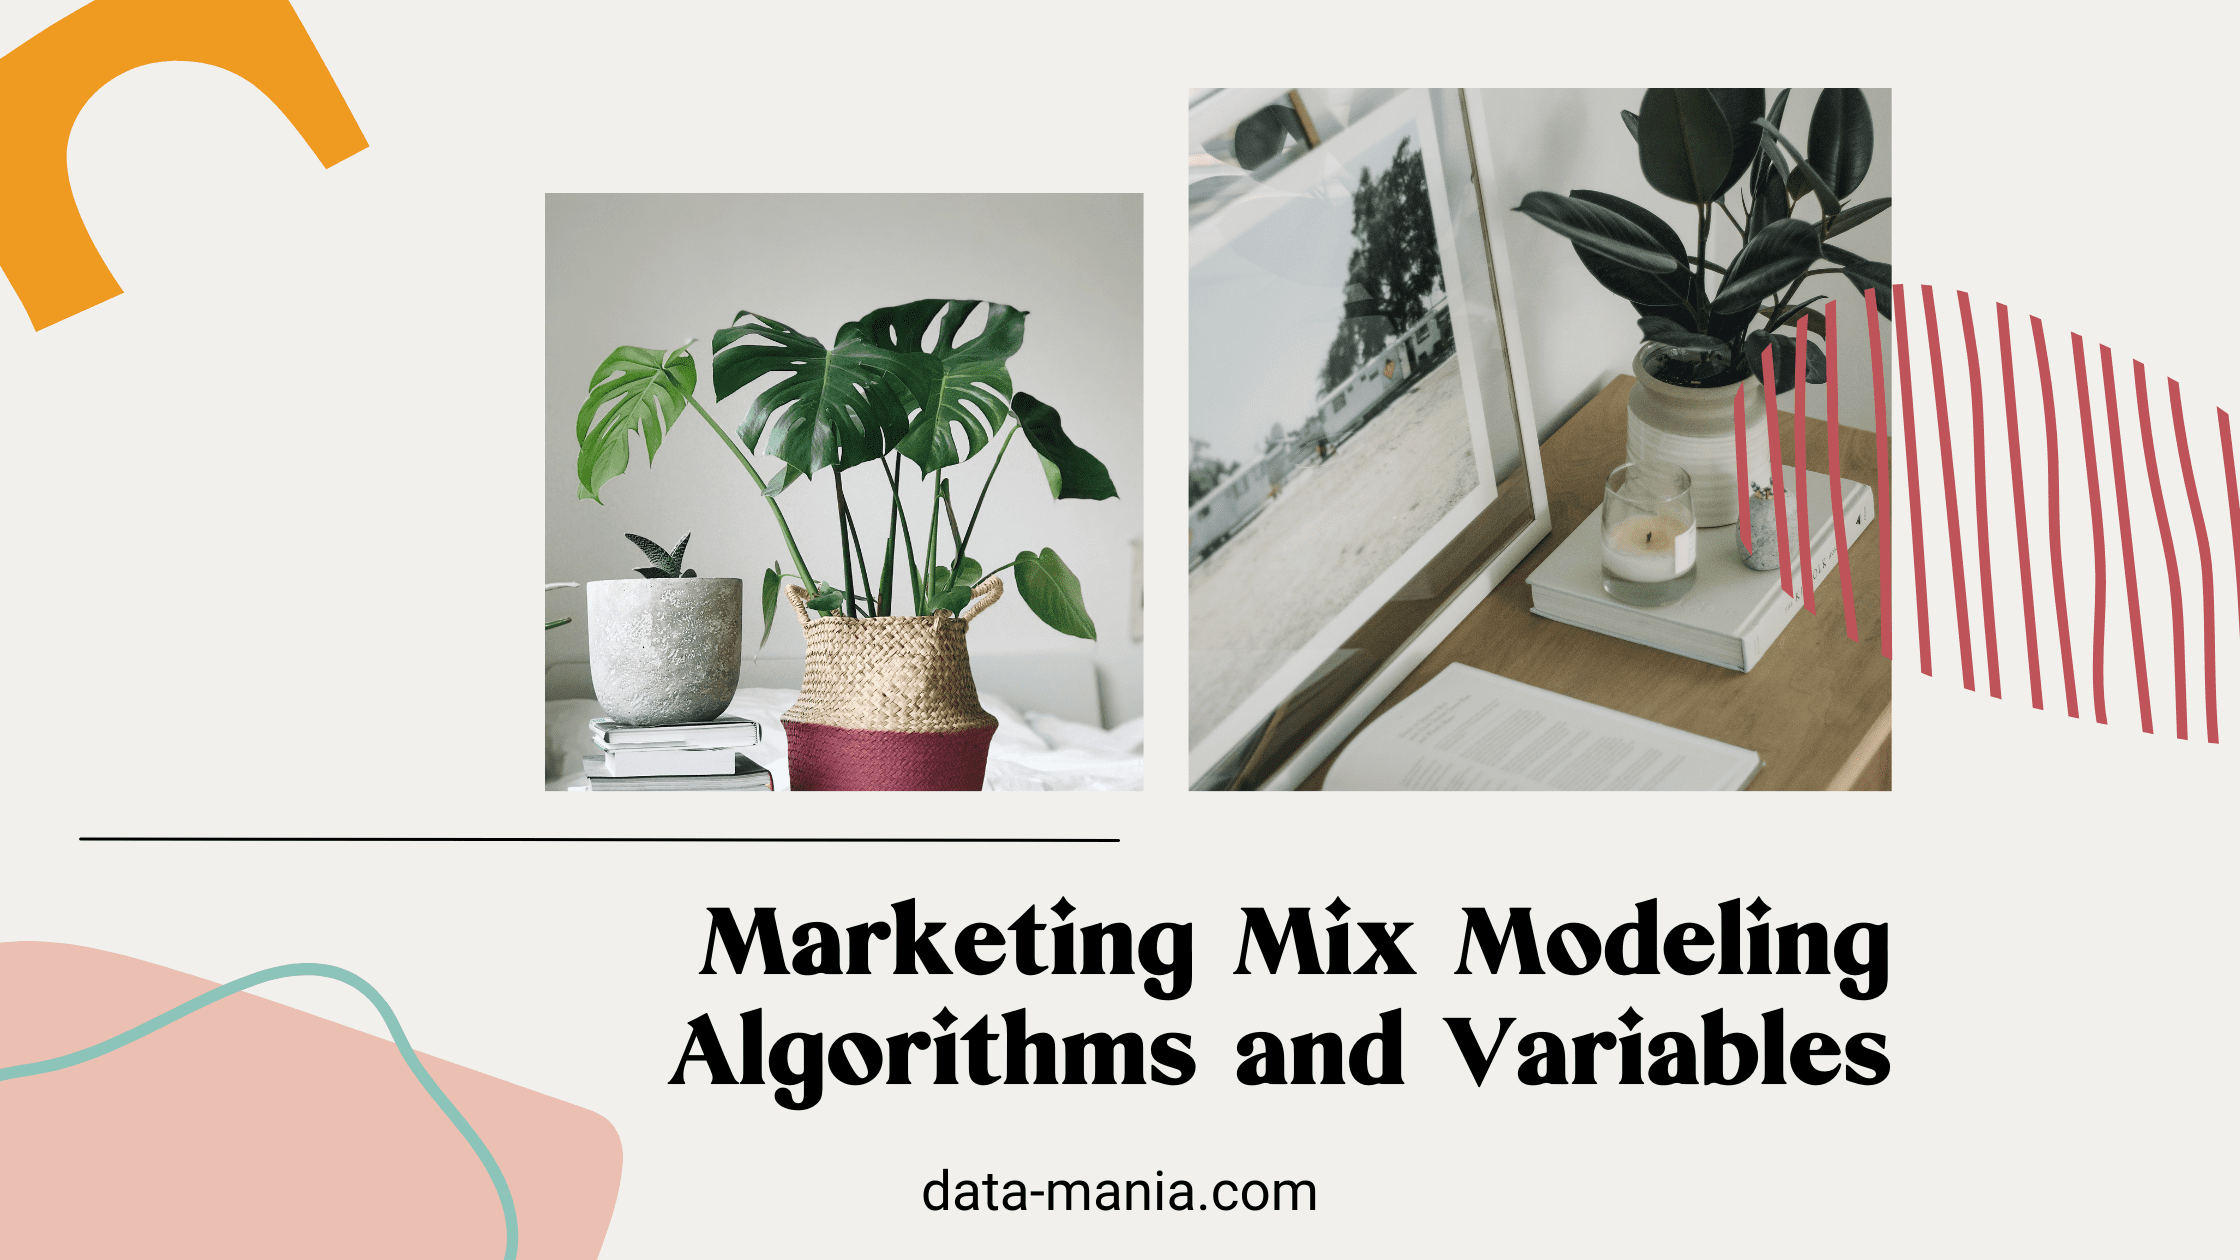 marketing mix modeling algorithms and variables